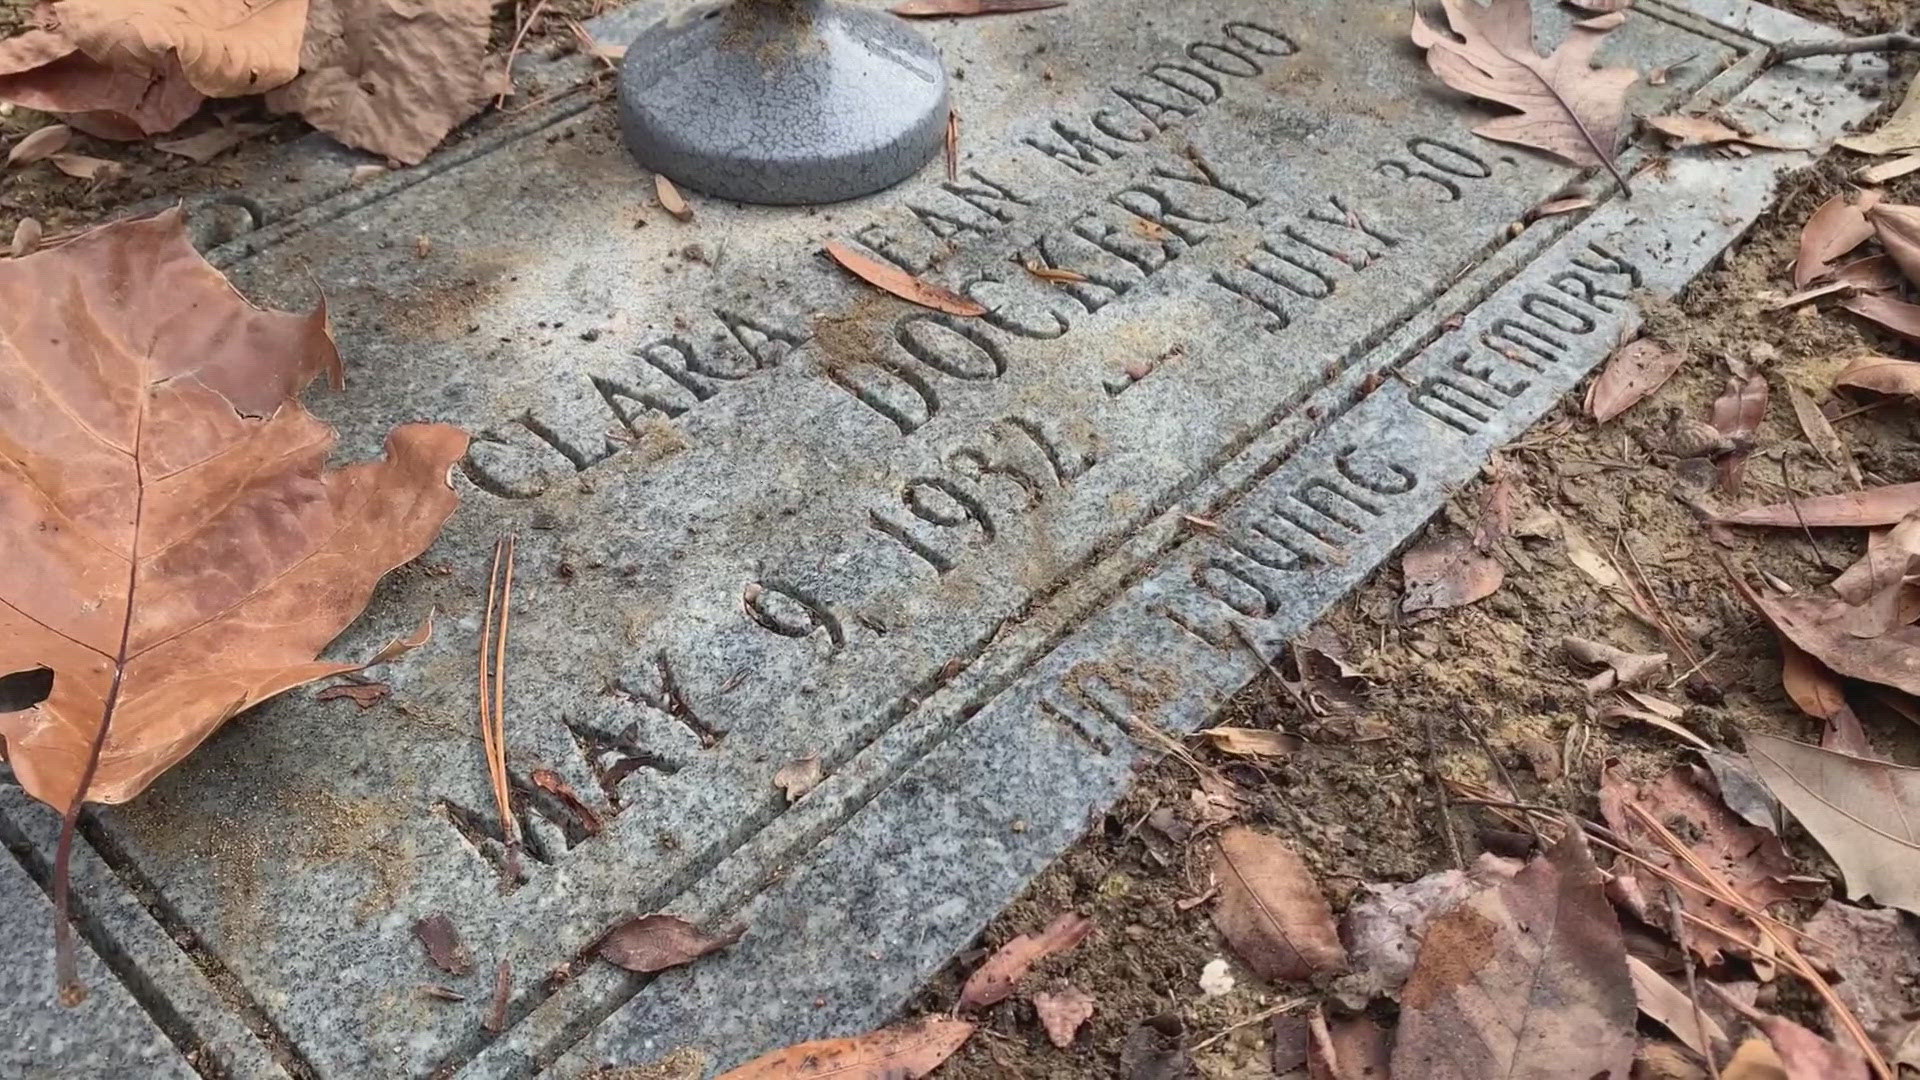 Brenda McAdoo was frustrated when the grave marker she ordered didn’t come out as expected.